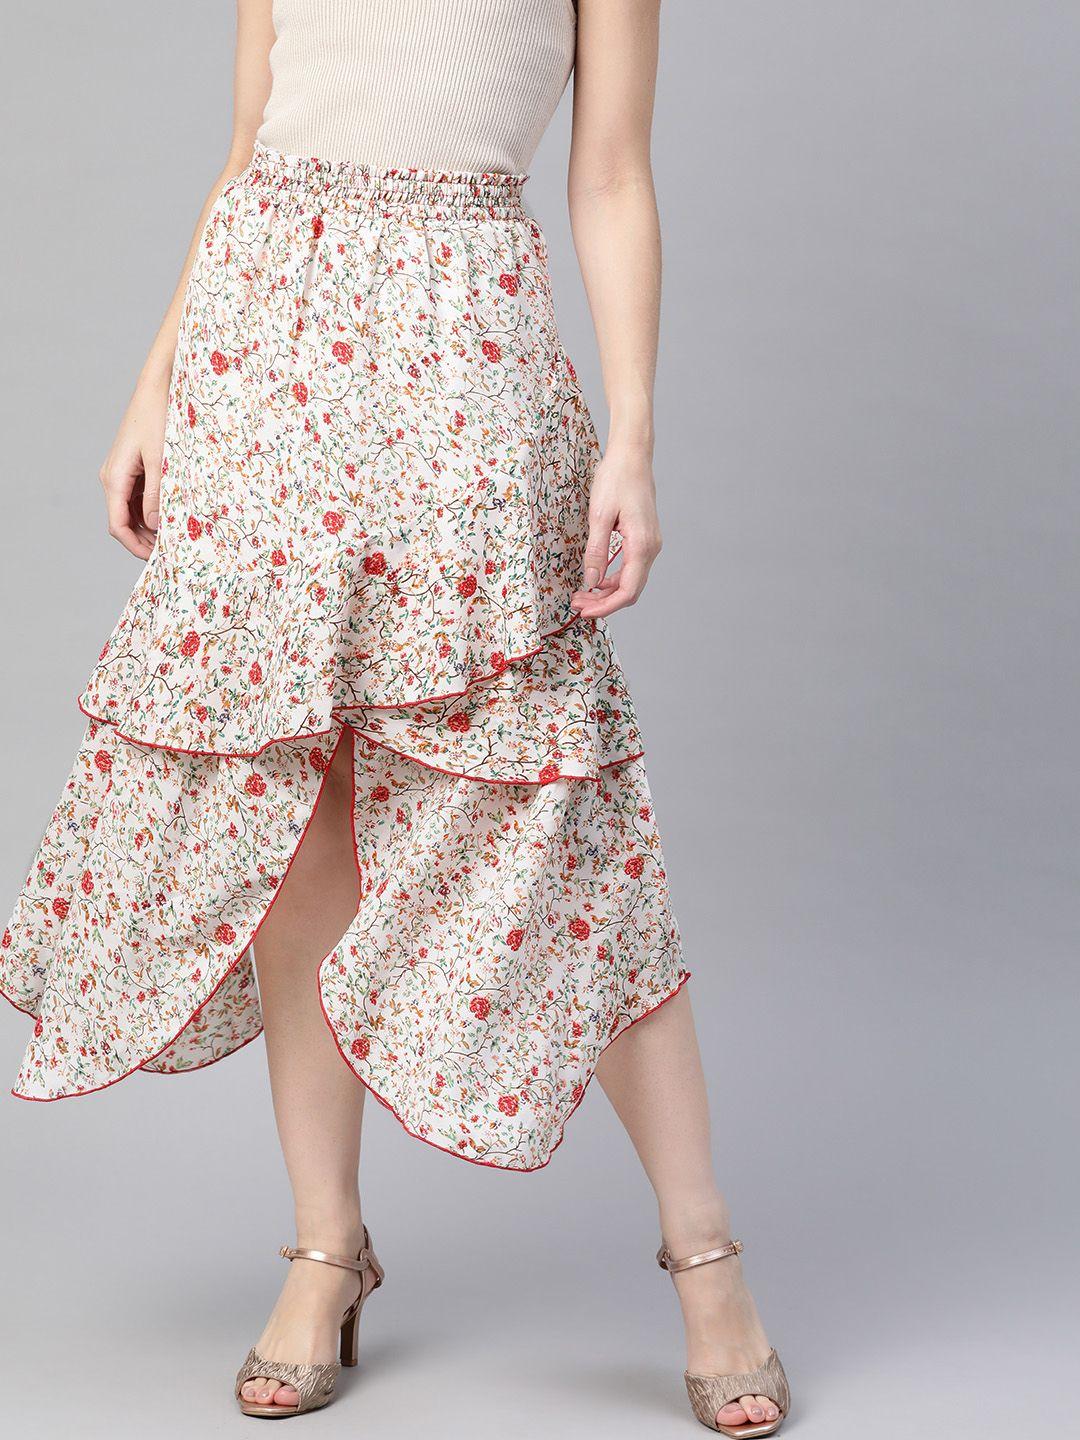 kassually women off-white & red floral printed tulip skirt